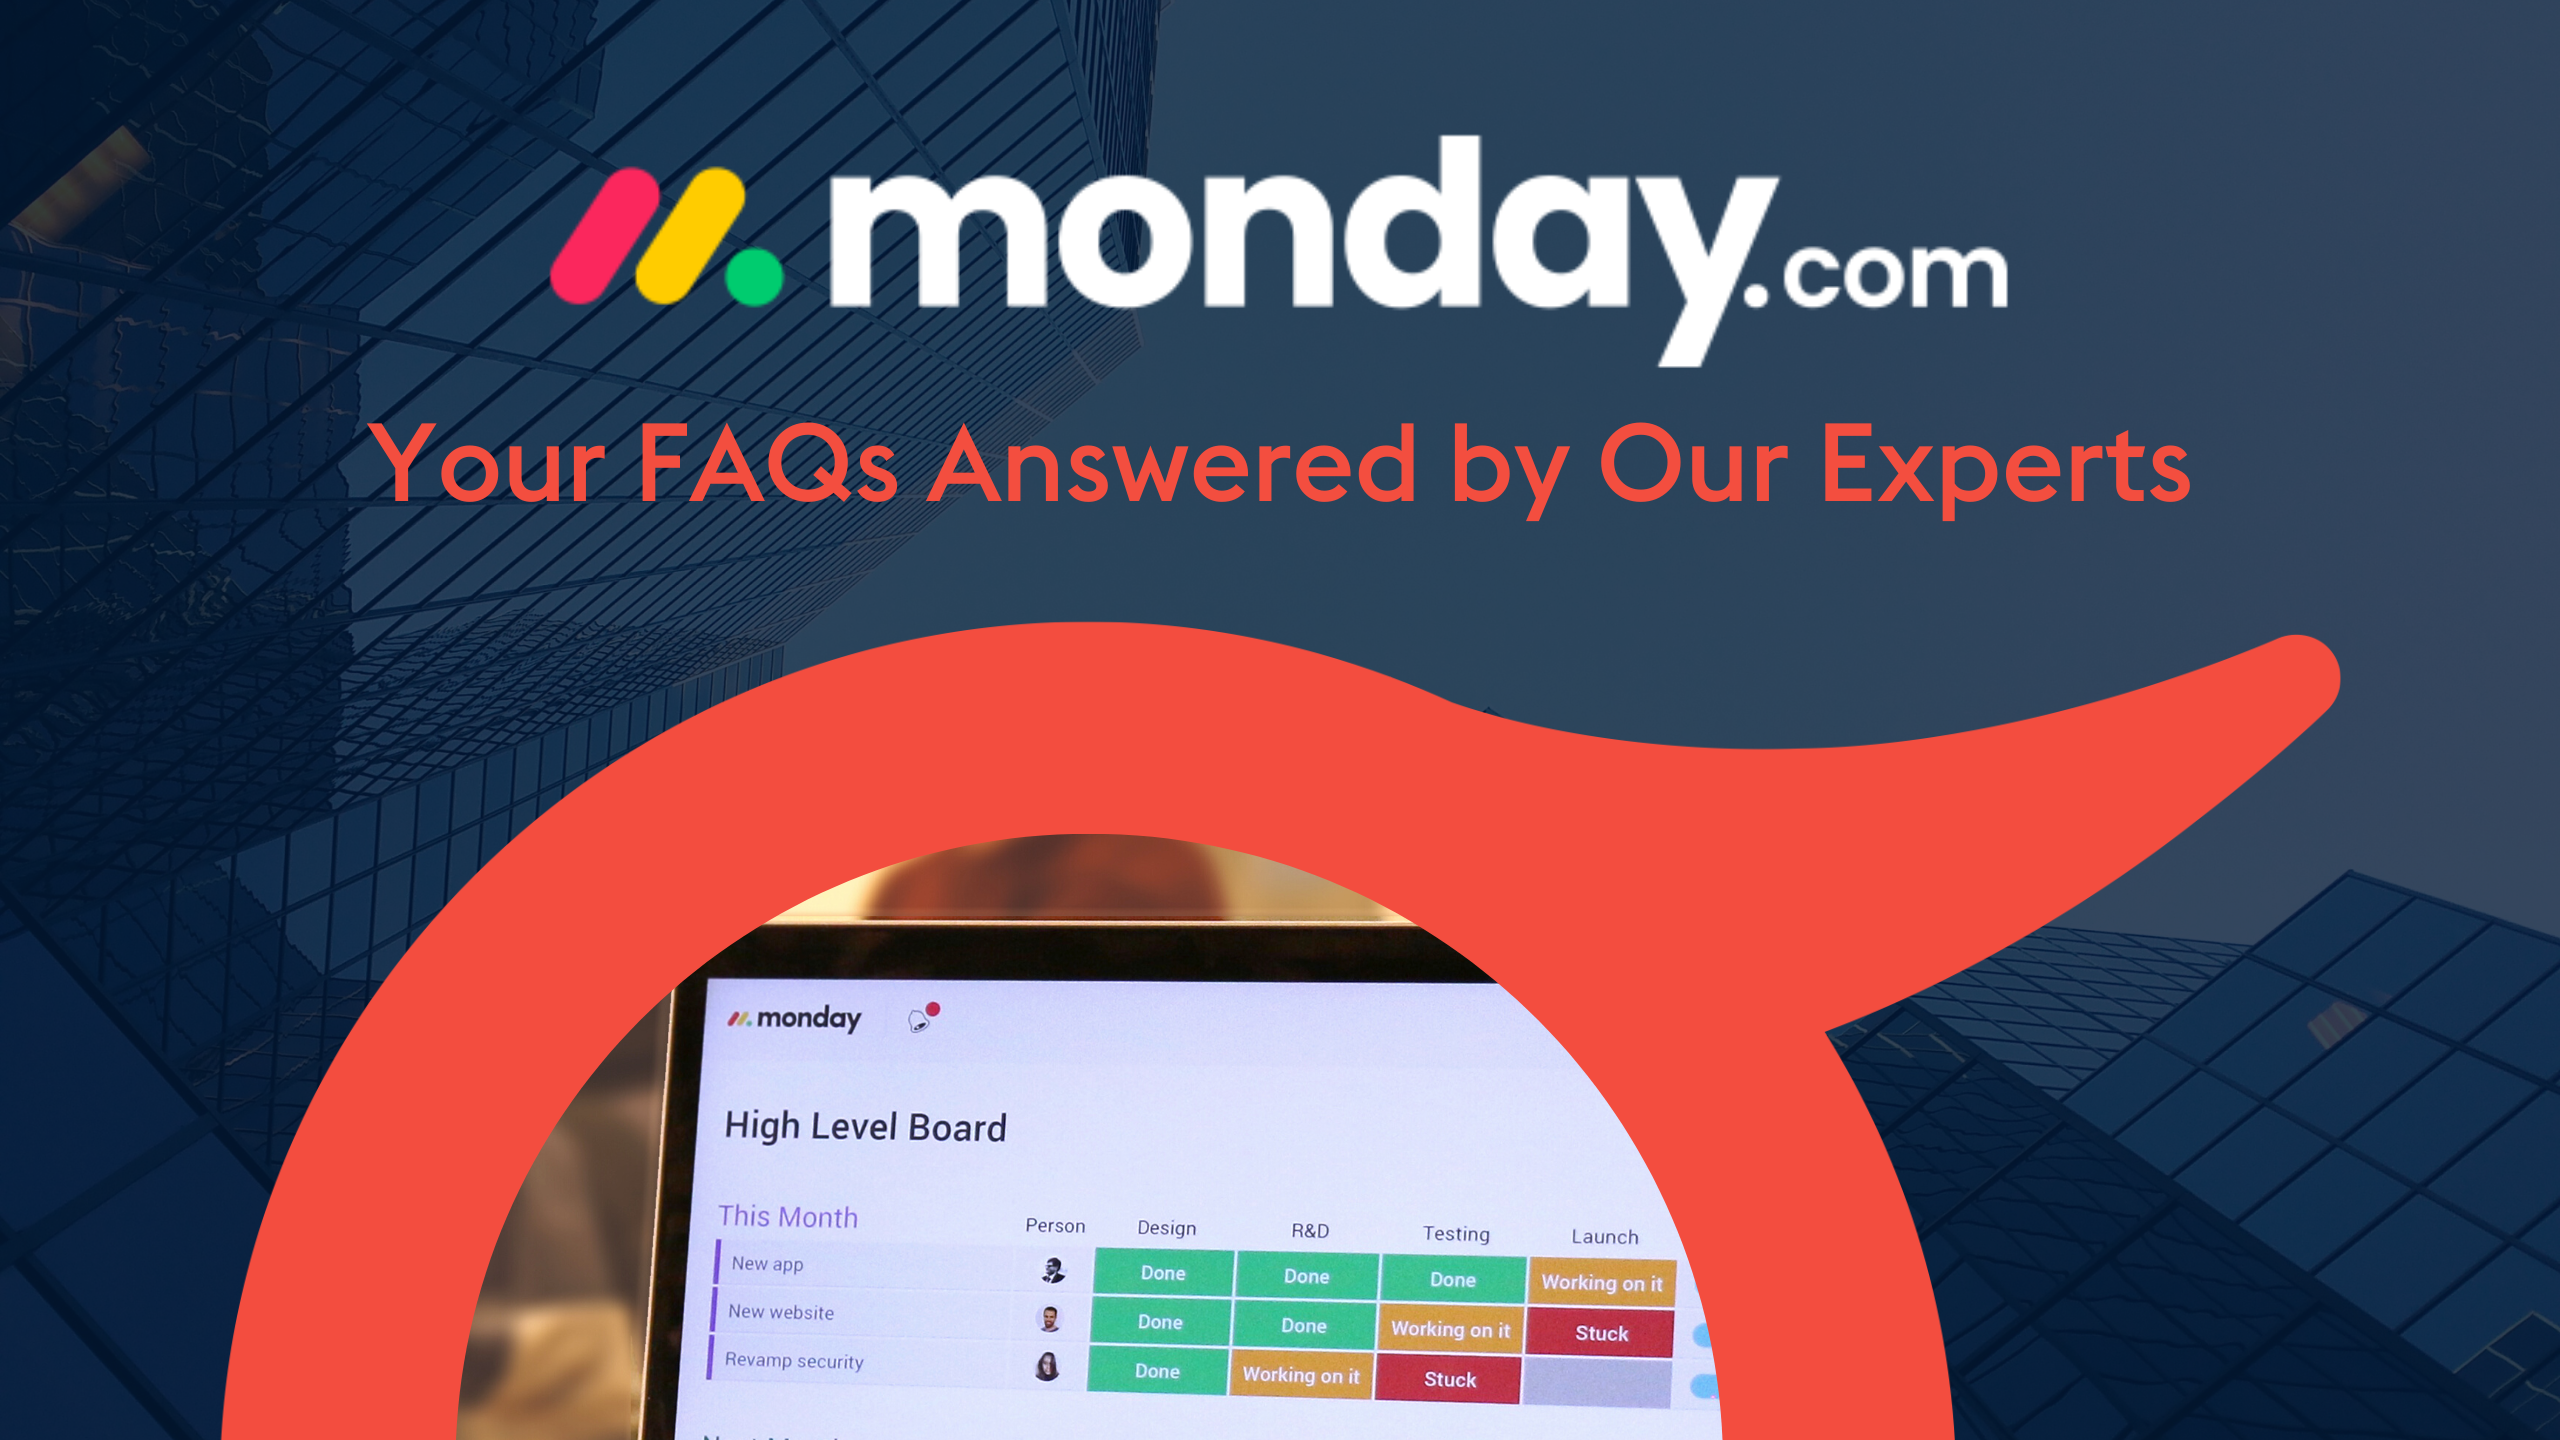 ProvidentCRM-CRM-monday.com-Your-FAQs-Answered-by-Our-Experts